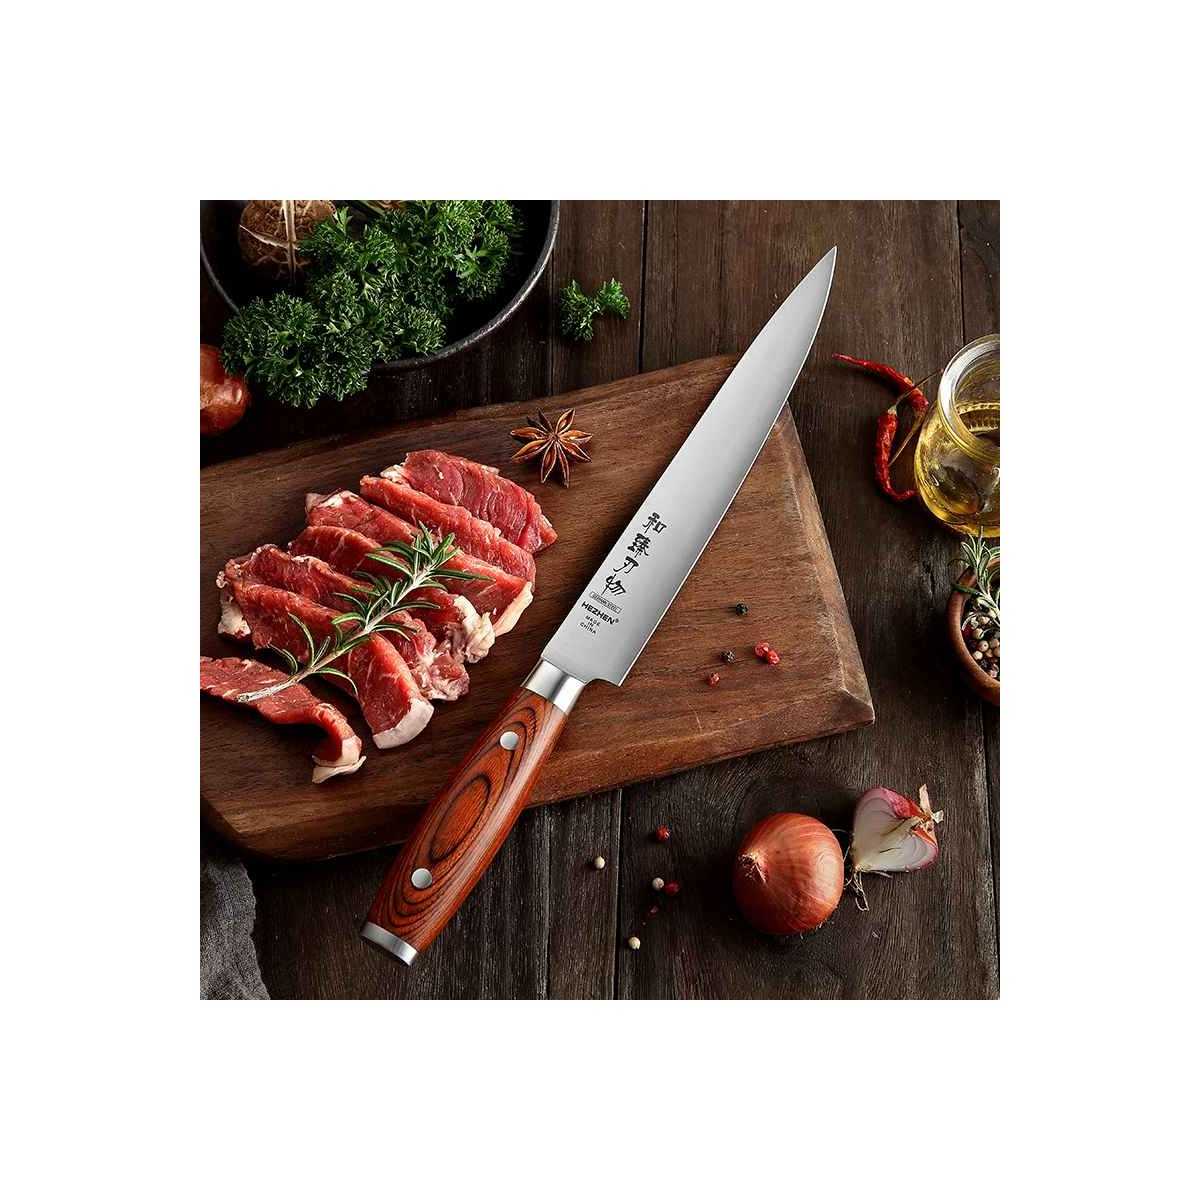 Hezhen Carving Knife 8 Inch